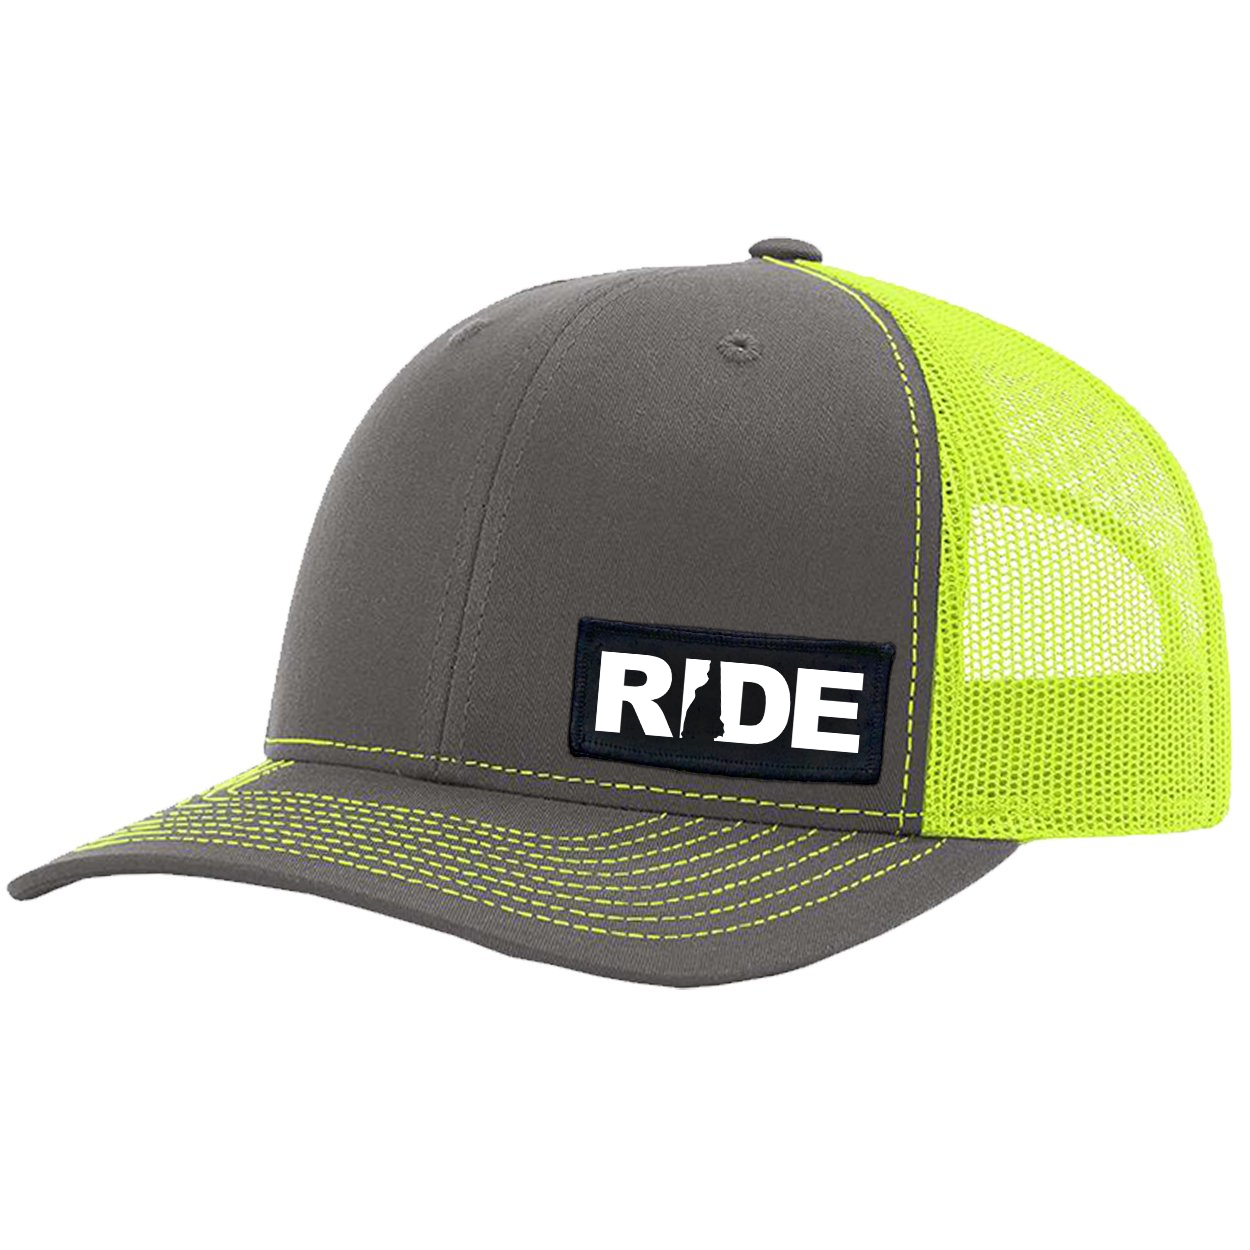 Ride New Hampshire Night Out Woven Patch Snapback Trucker Hat Charcoal/Neon Yellow (White Logo)